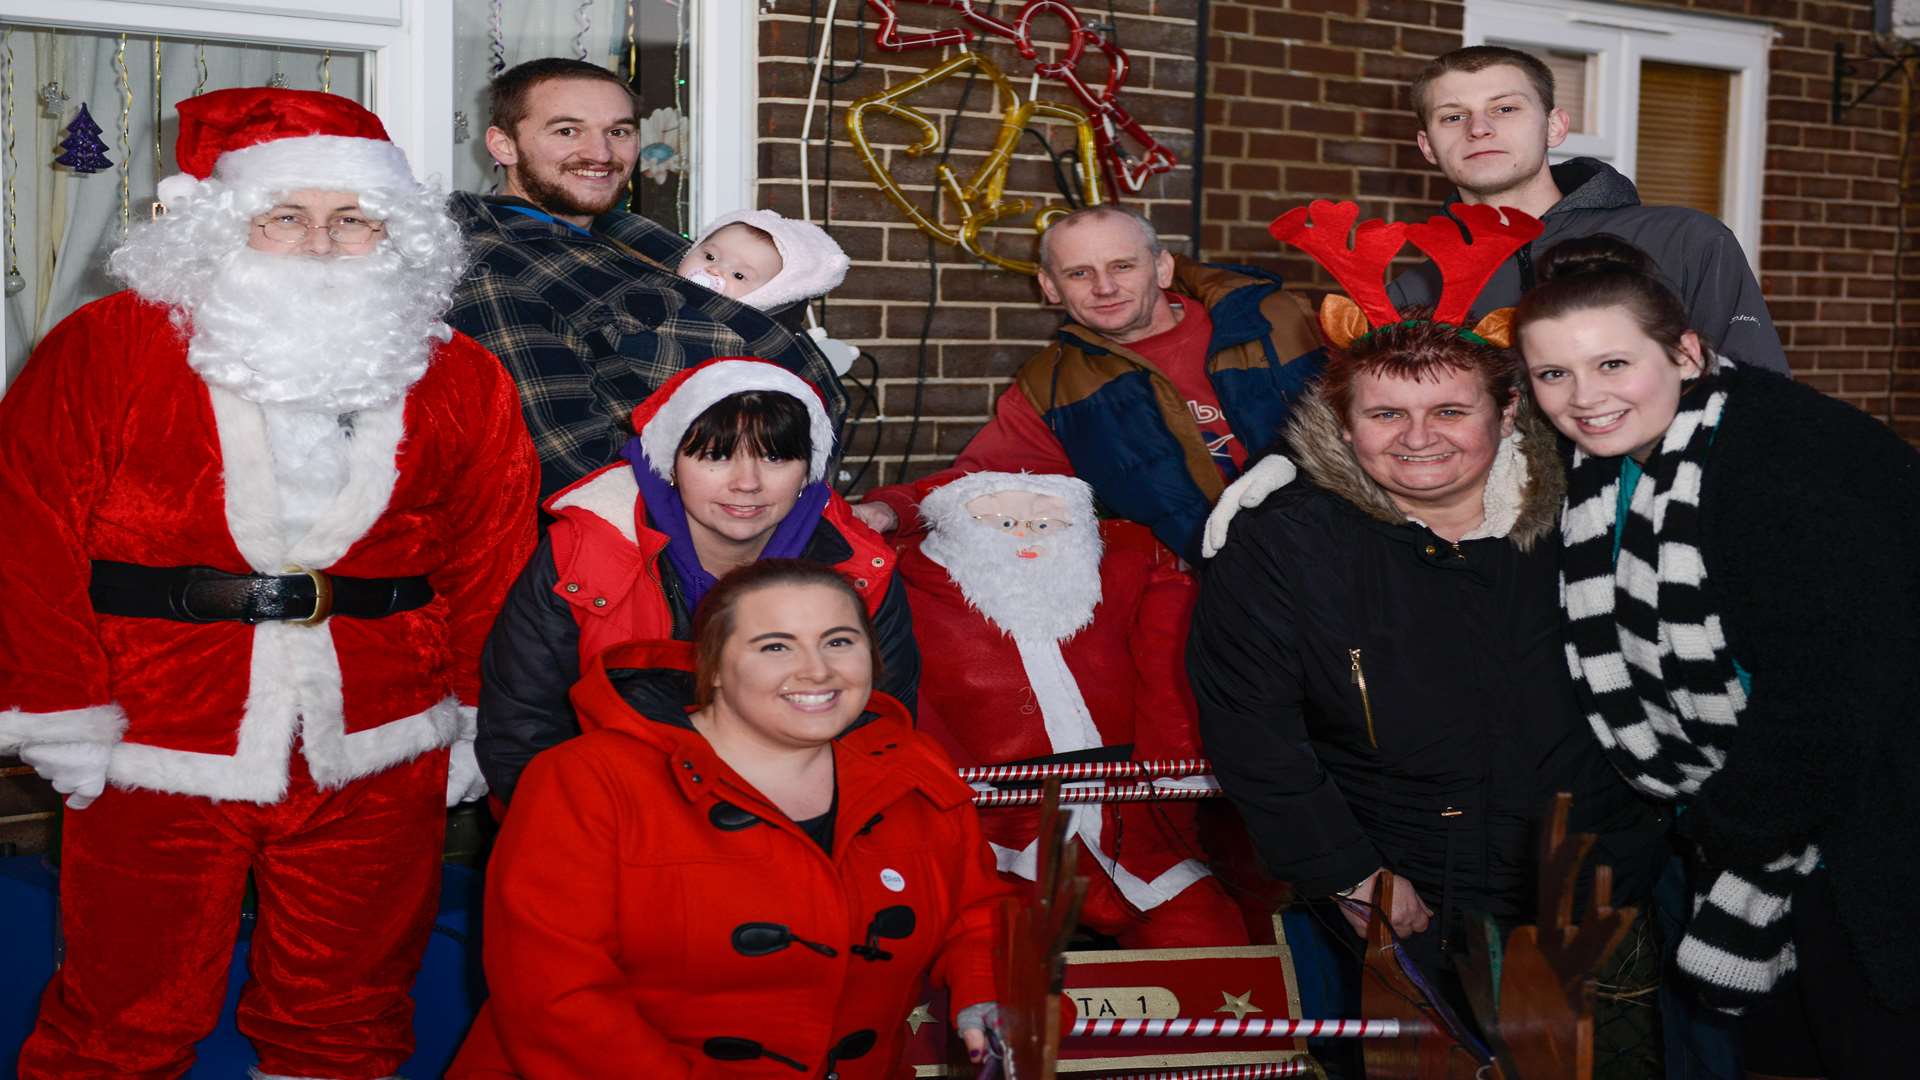 Lee Curry dressed as Santa with Stephanie, Angie, Lee, Samantha Curry and Jacob Townsend, Dean Mossop and Becky Loftus